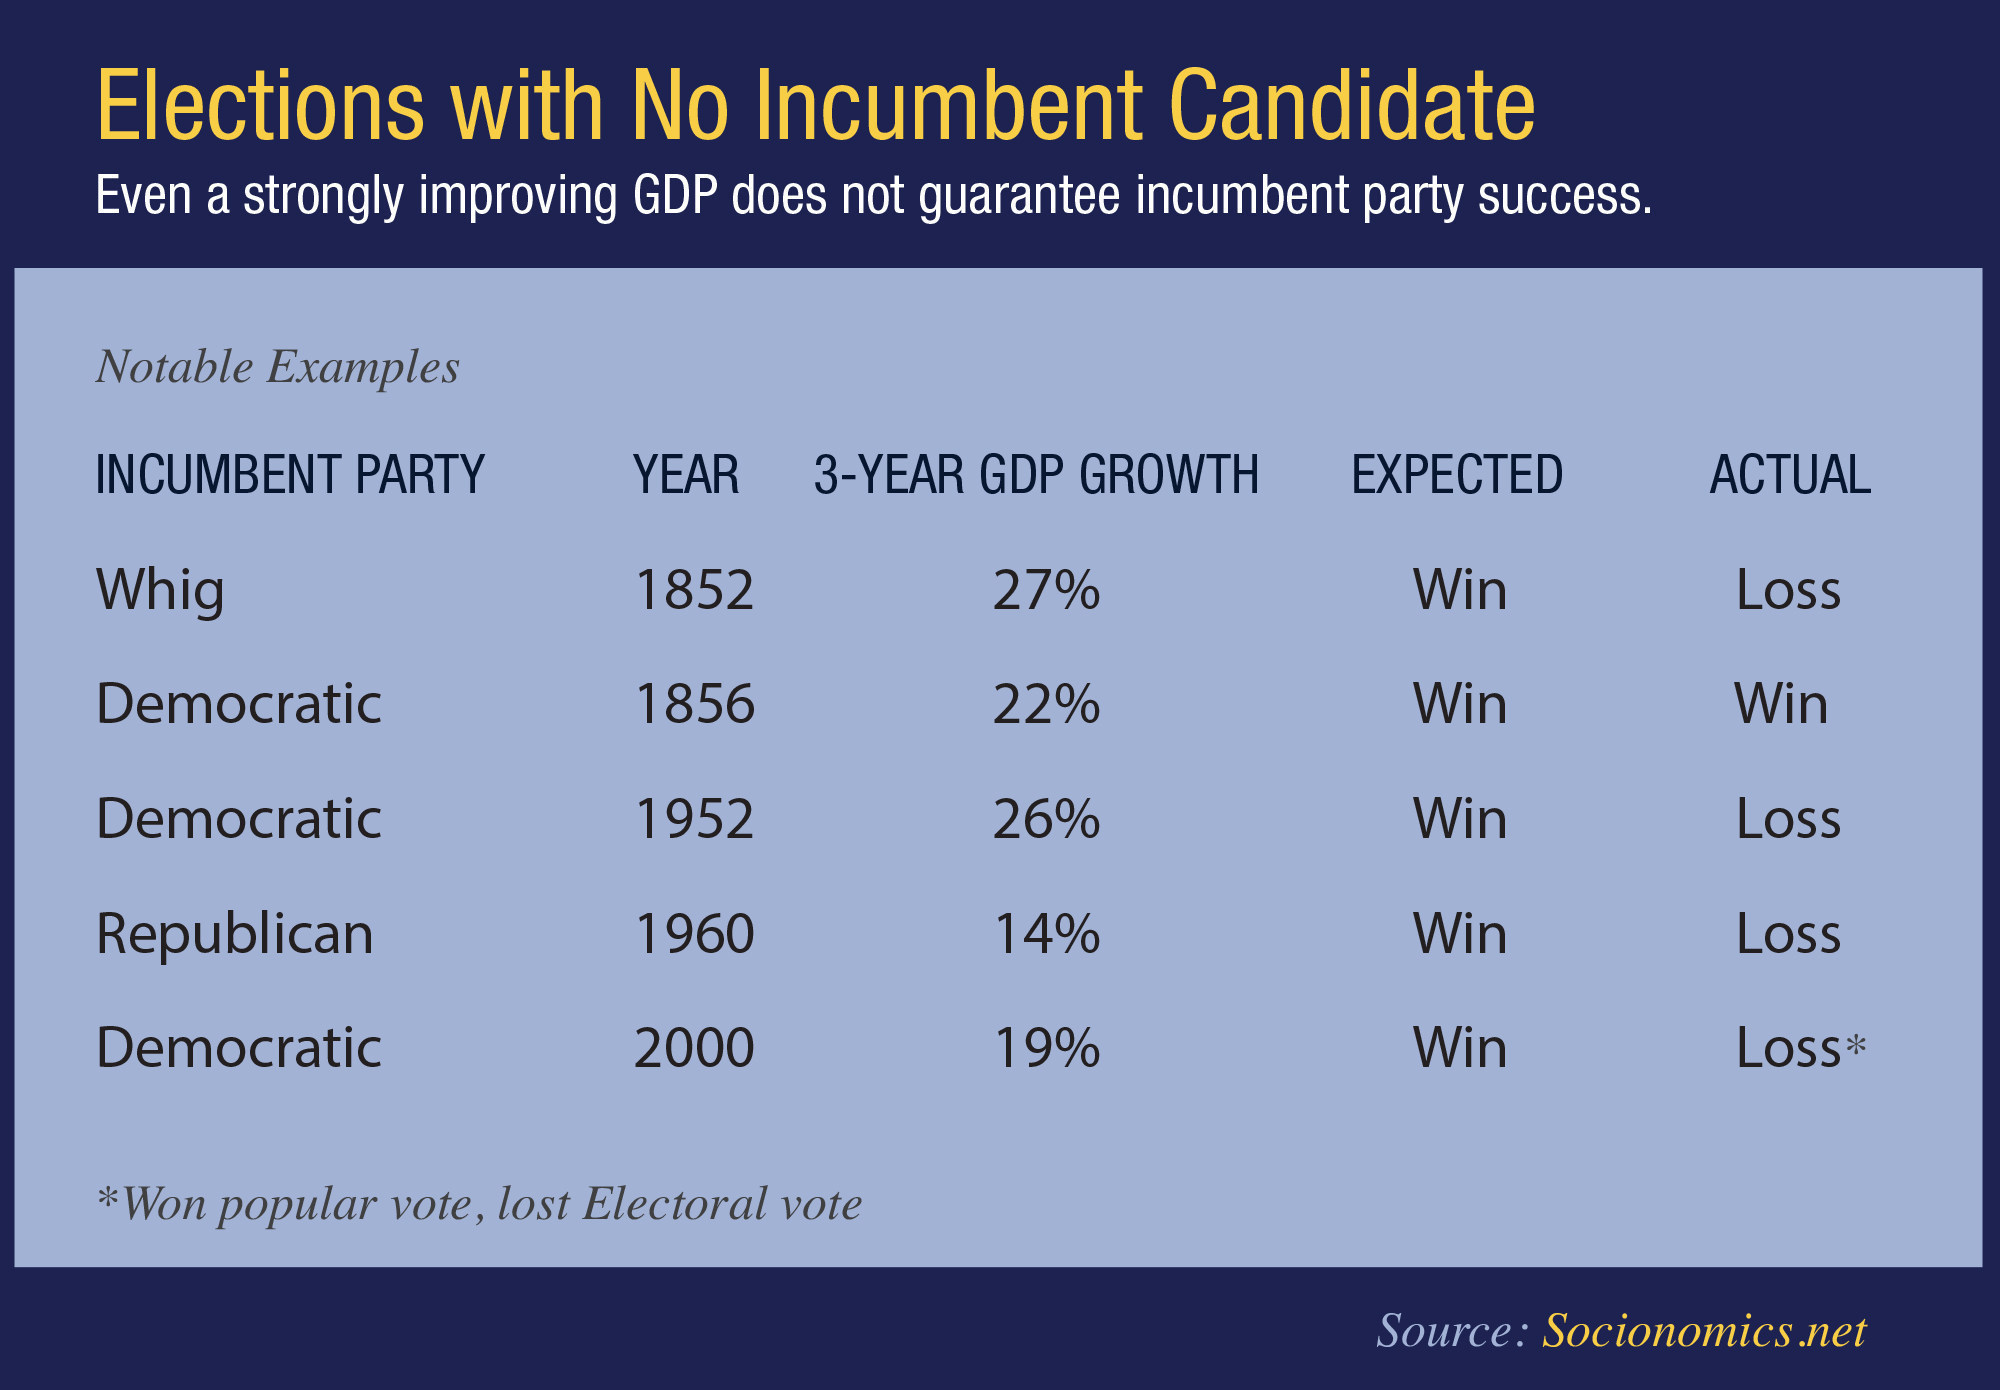 Study shows economy and markets cannot predict this year&apos;s election. Even a strongly improving GDP does not guarantee incumbent party success. (PRNewsFoto/The Socionomics Institute)